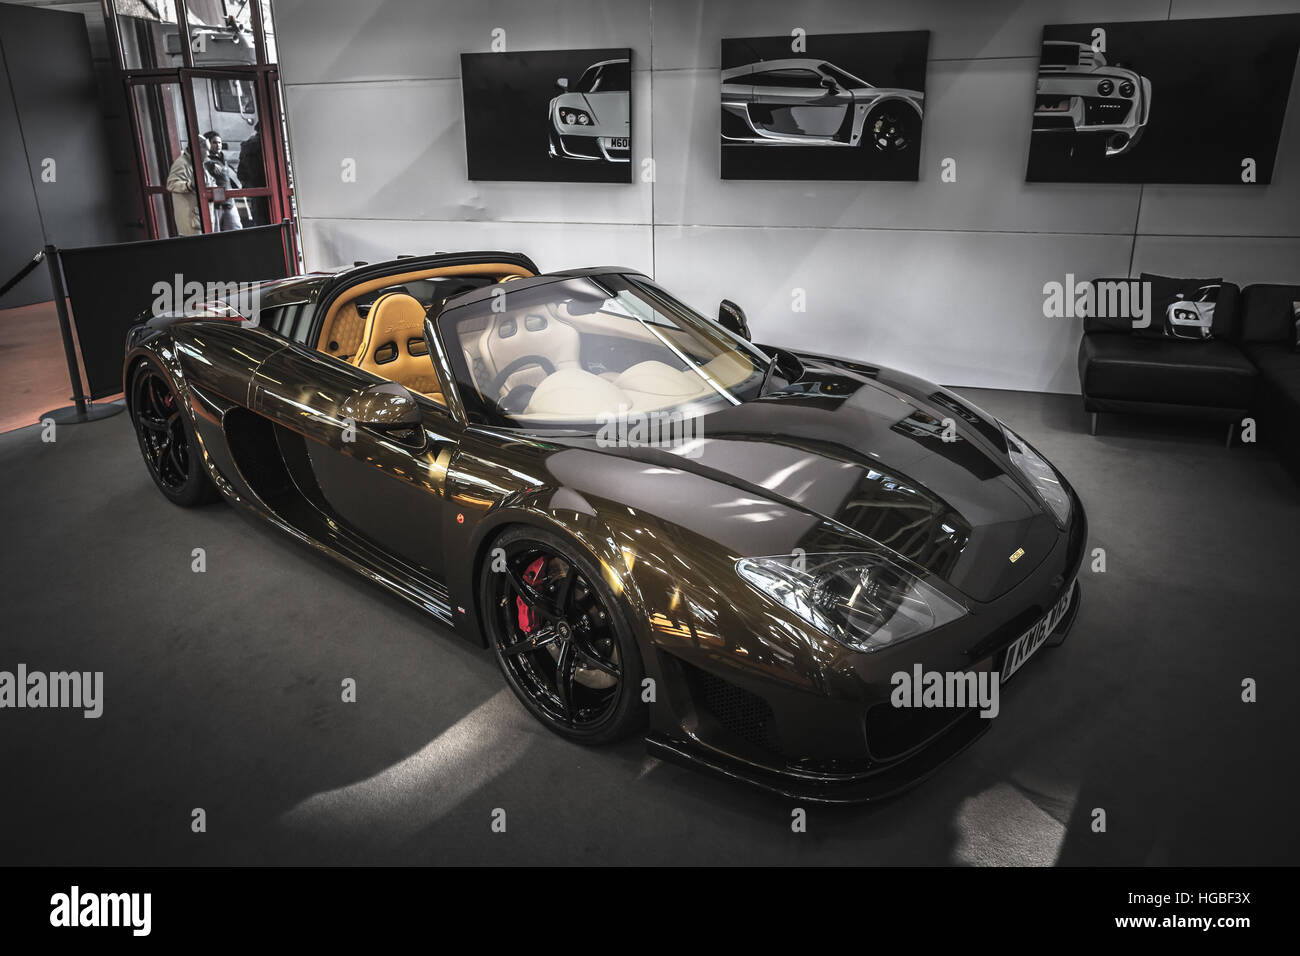 Italy, Bologna motor show 2016, Noble m600 roadster luxury sport car auto Stock Photo